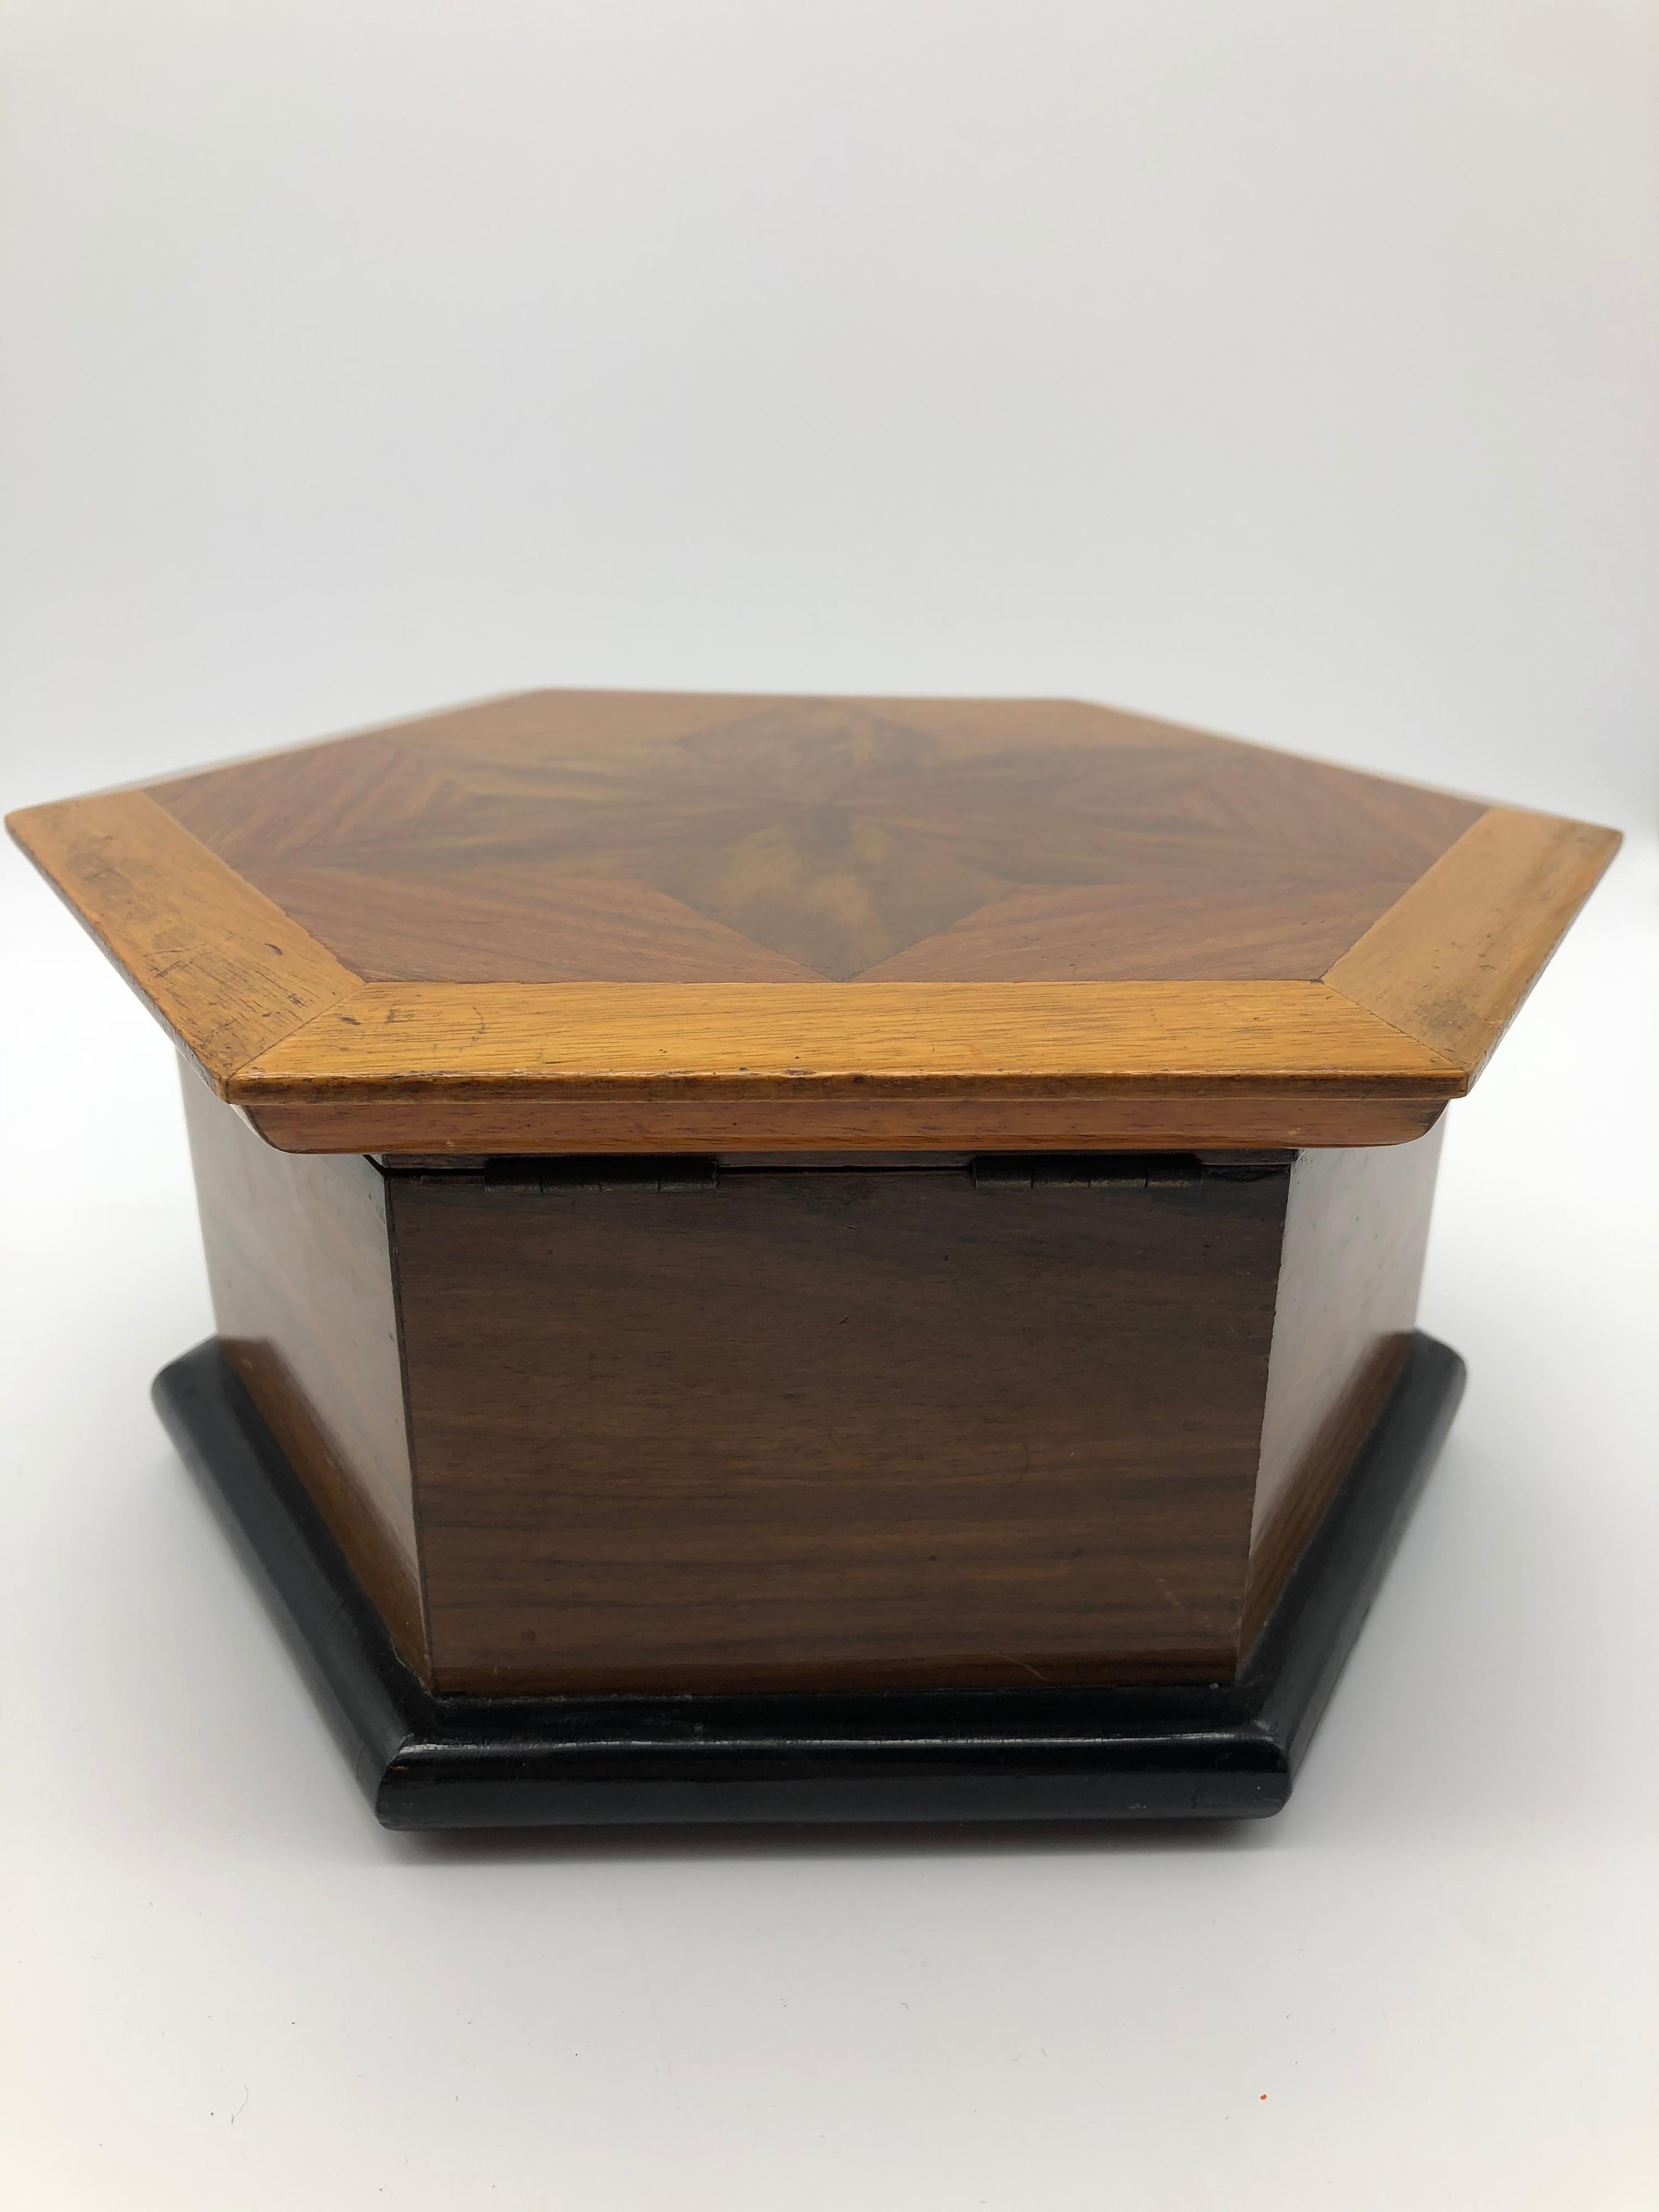 Octagonal Jewelry Box Star Inlaid Wood Antique In Good Condition For Sale In Berlin, DE